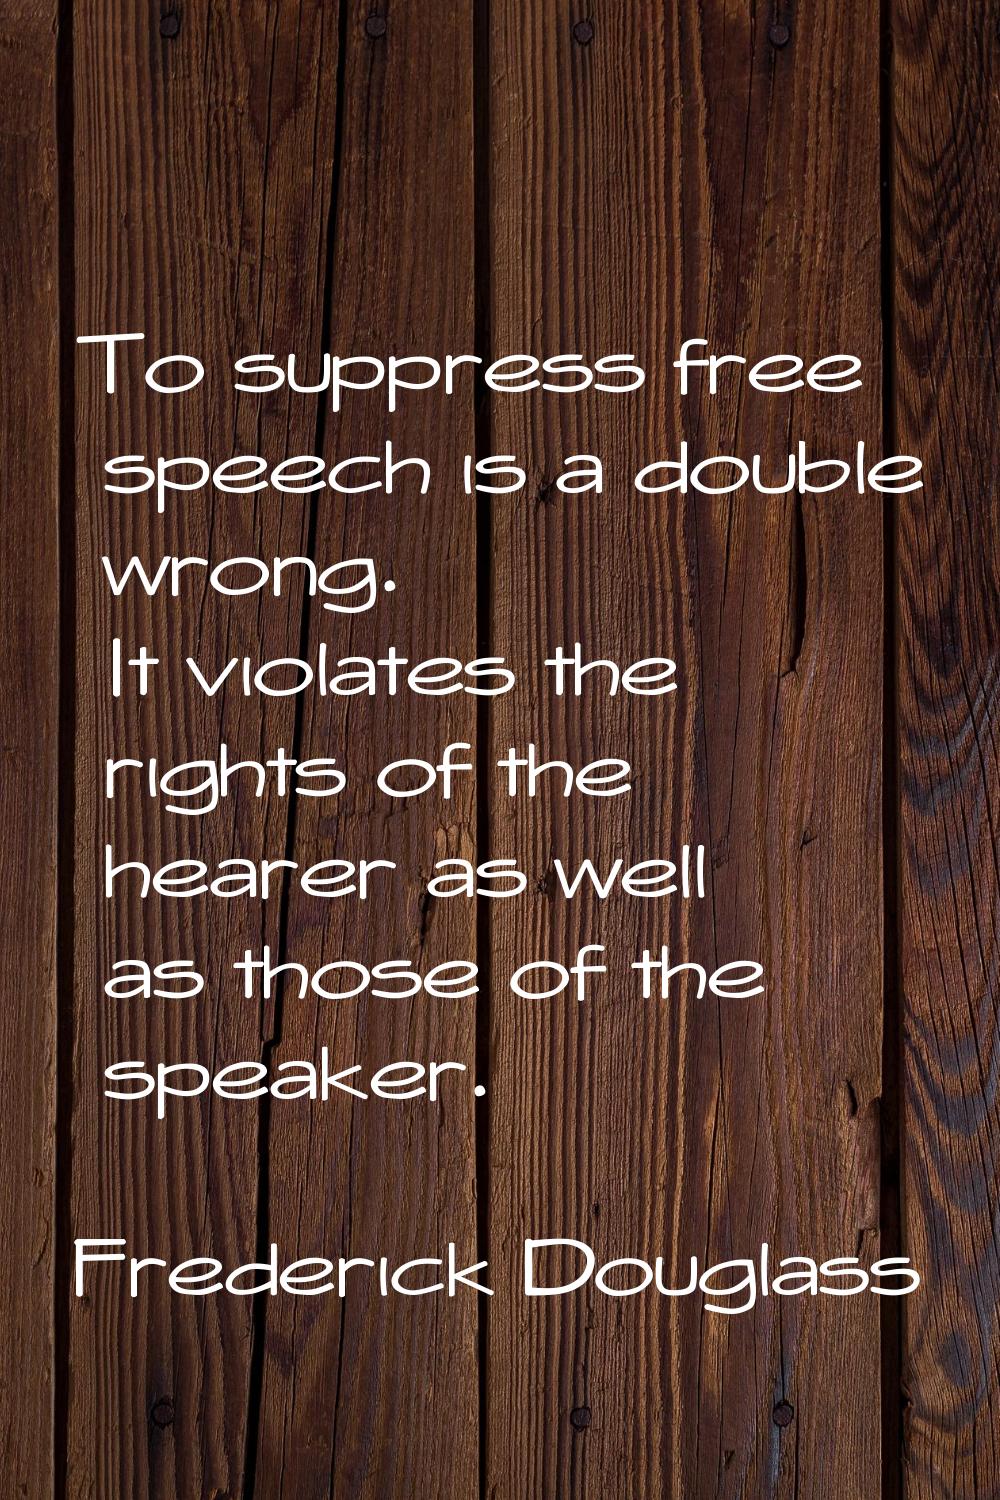 To suppress free speech is a double wrong. It violates the rights of the hearer as well as those of